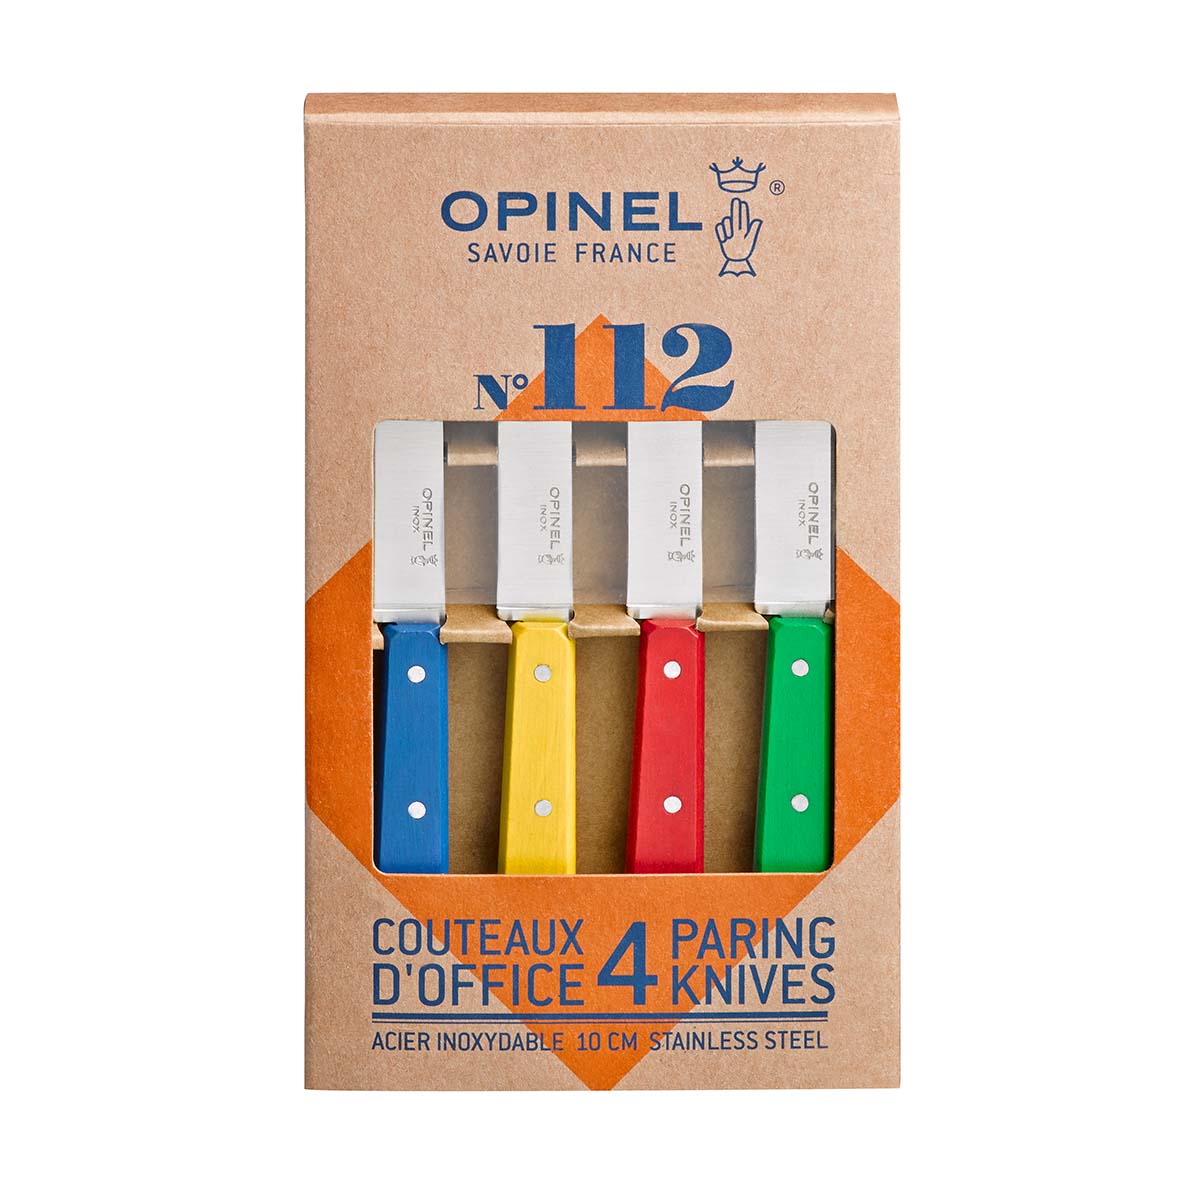 Opinel No.112 Stainless Steel Paring Knives Set - Apple Valley Emporium